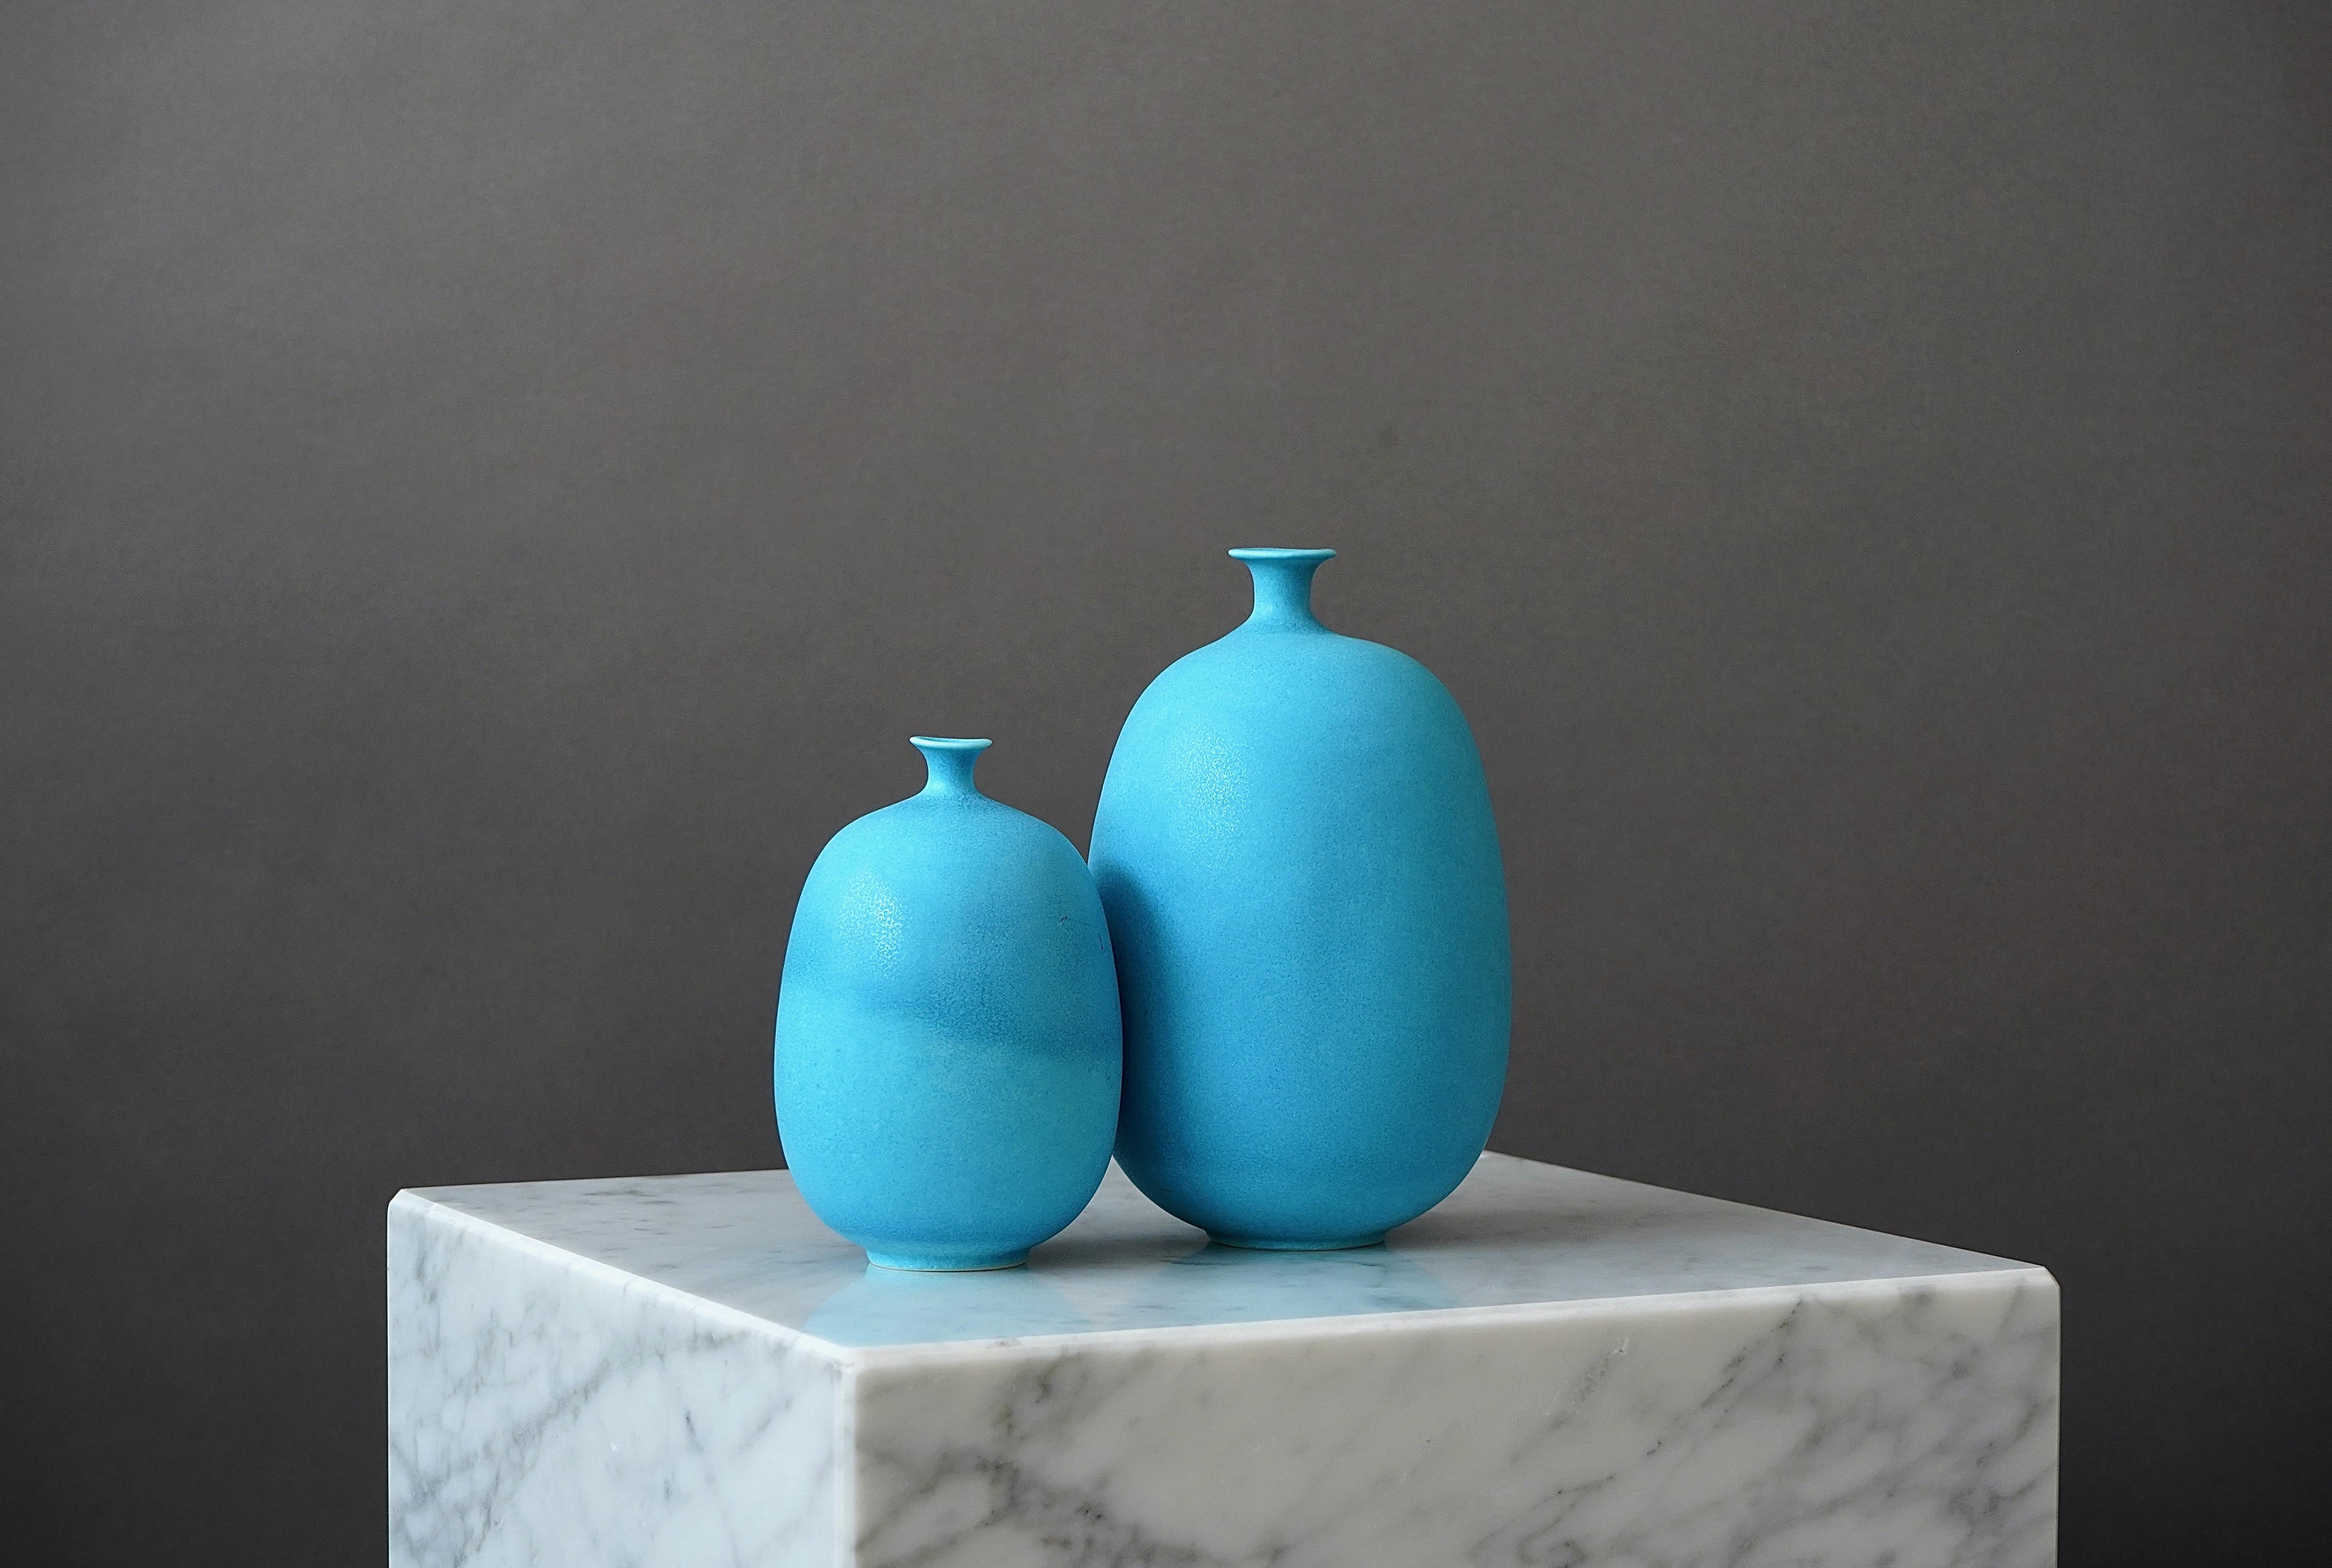 Swedish Set of 2 stoneware 'Balloon' Vases by Inger Persson, Rorstrand, Sweden, 1980s For Sale